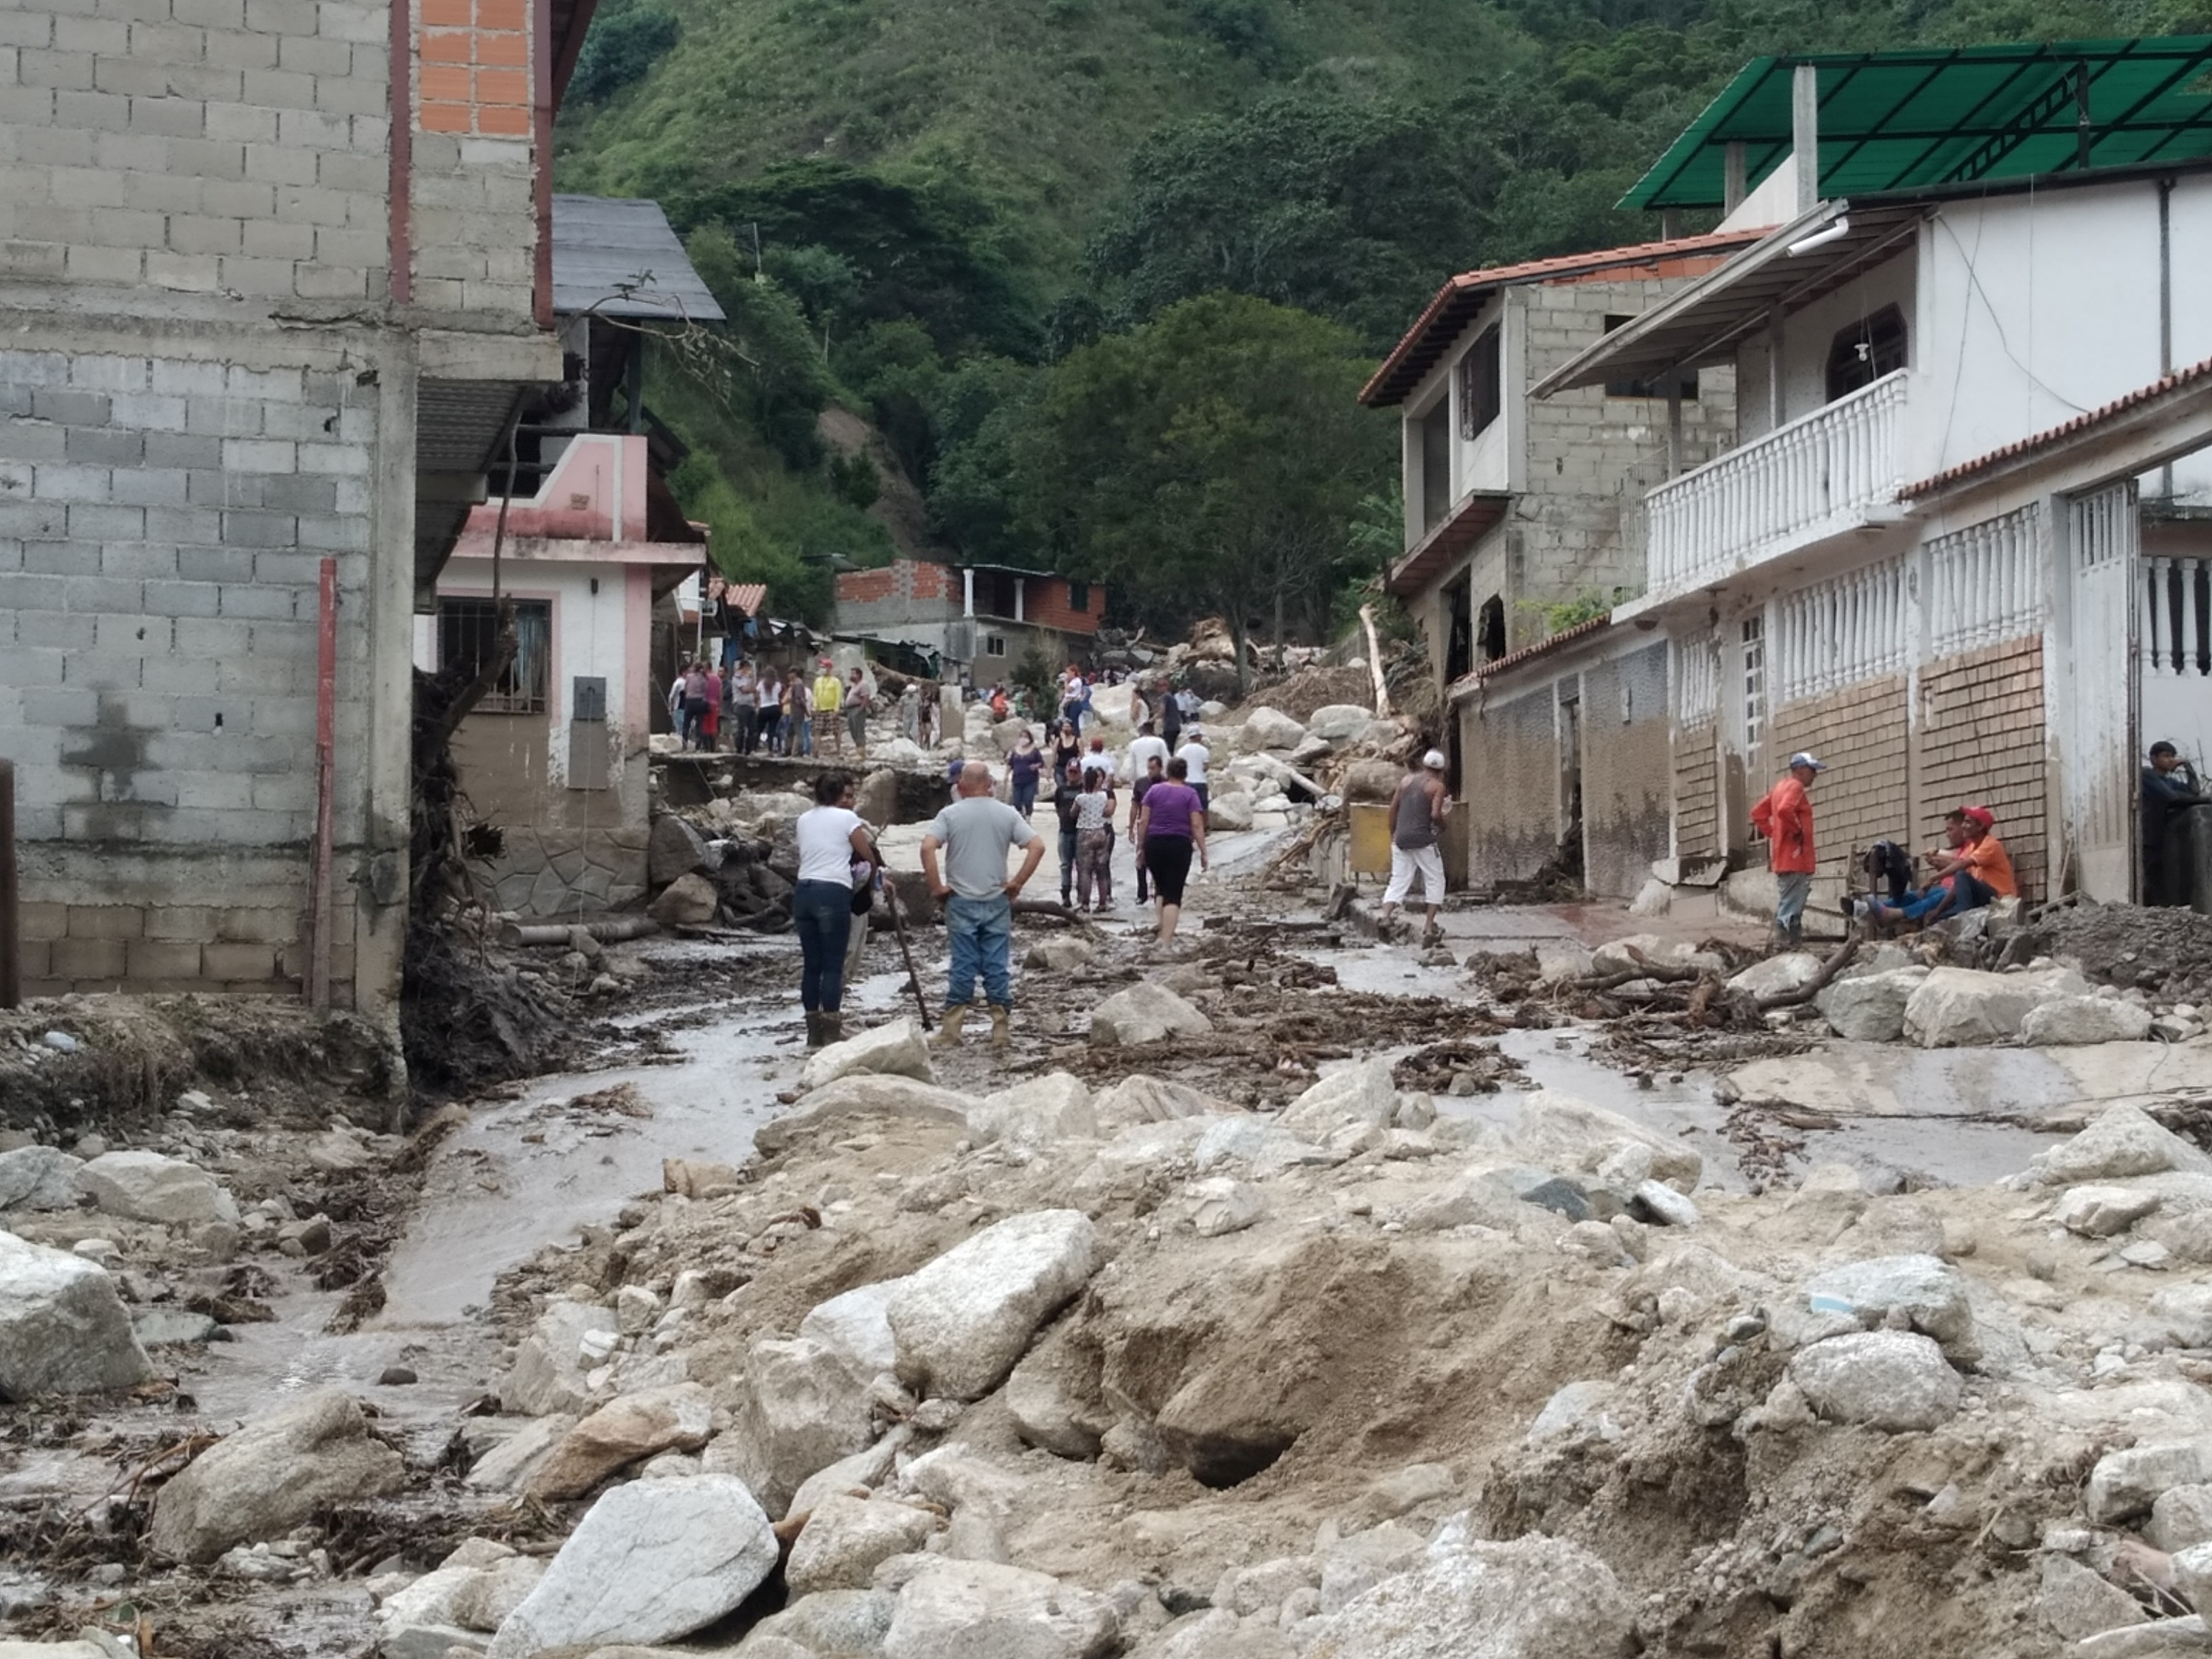 Death Toll Rises to at least 20 in Western Venezuela Floods